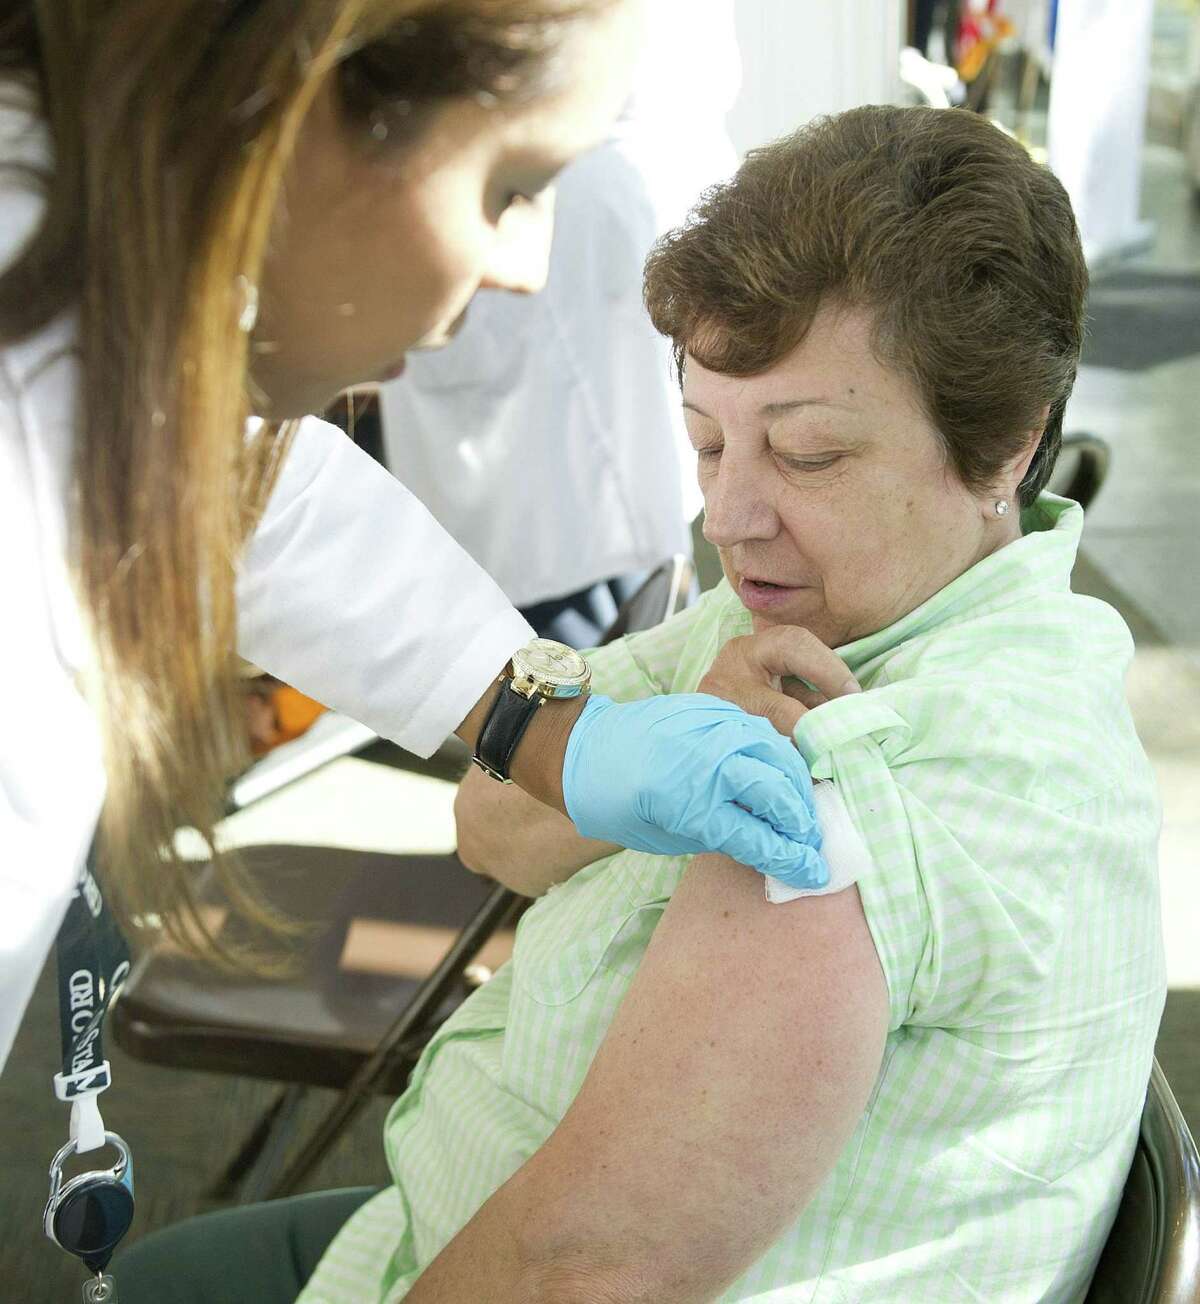 FILE — In this file photo, Stamford Public Schools employee Jeanie Valentine gets a flu shot at the government center.